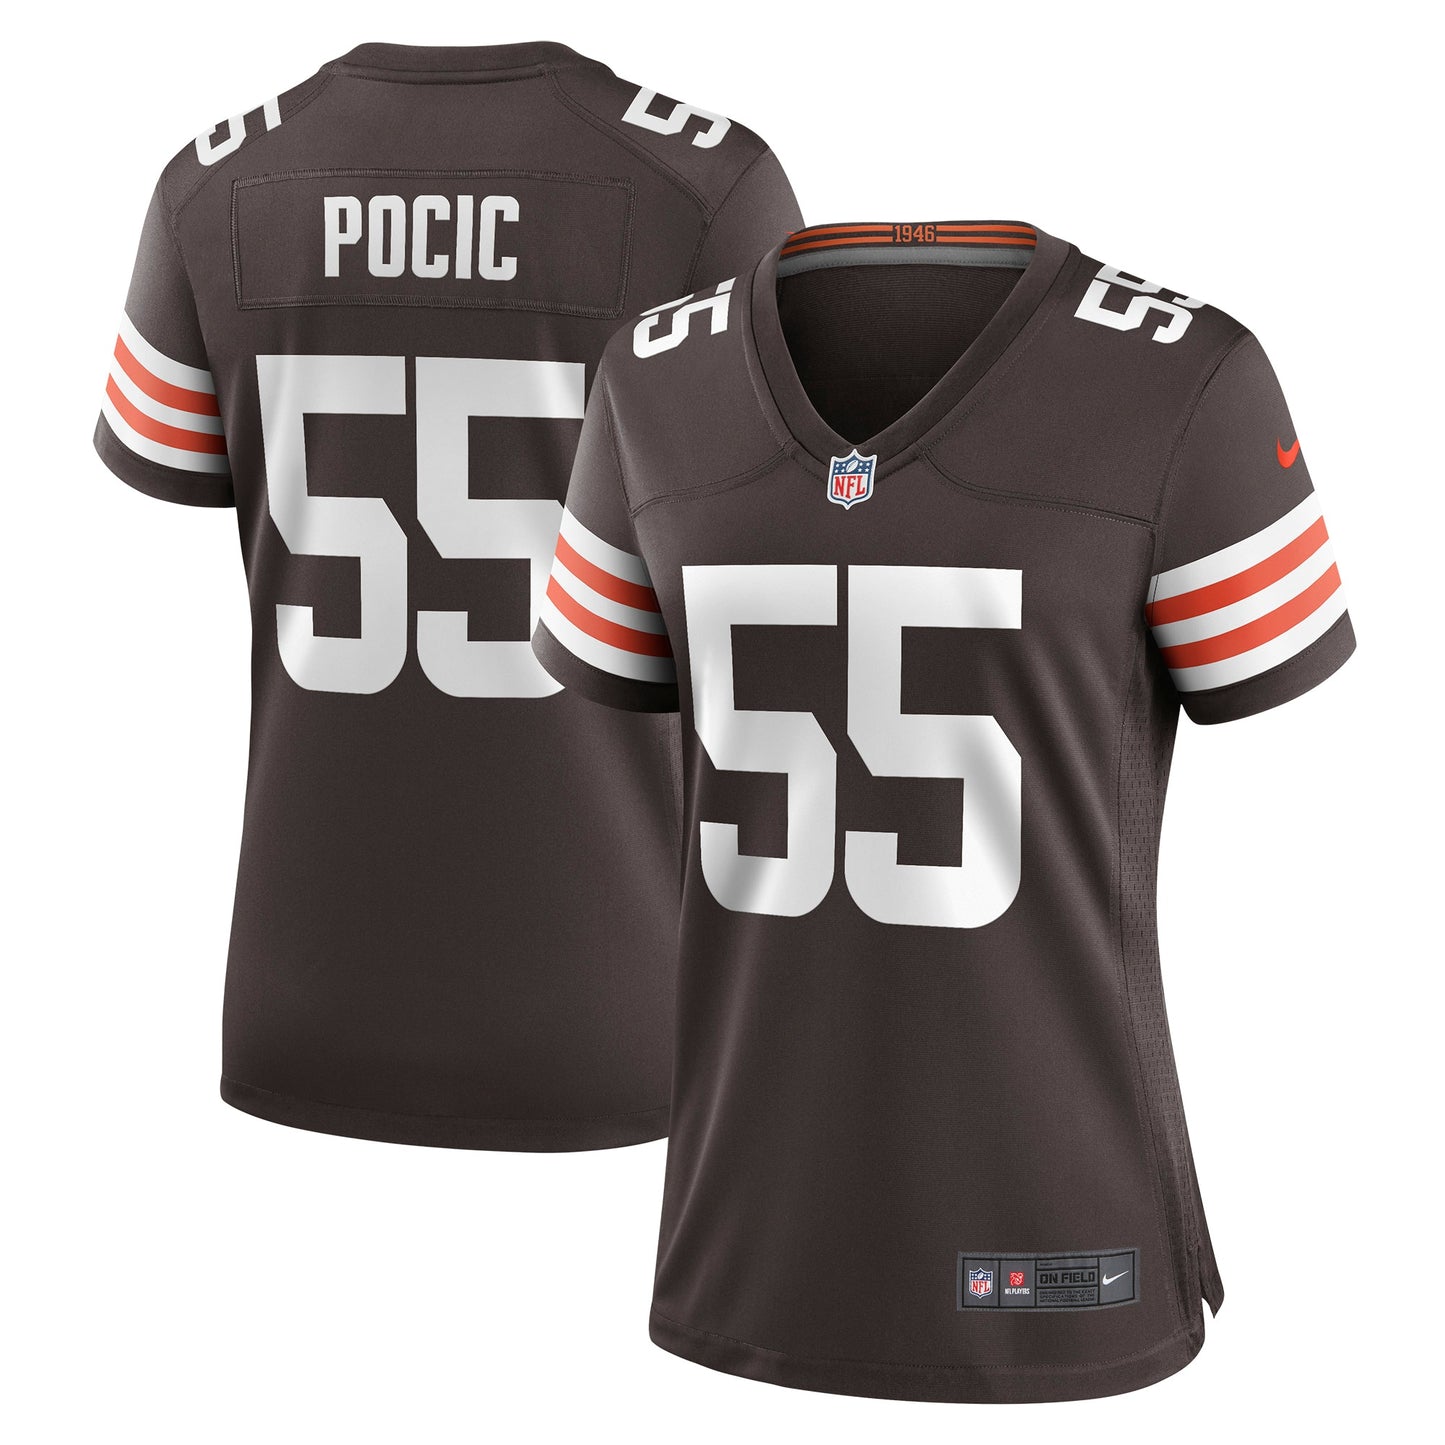 Ethan Pocic Cleveland Browns Nike Women's Game Jersey - Brown